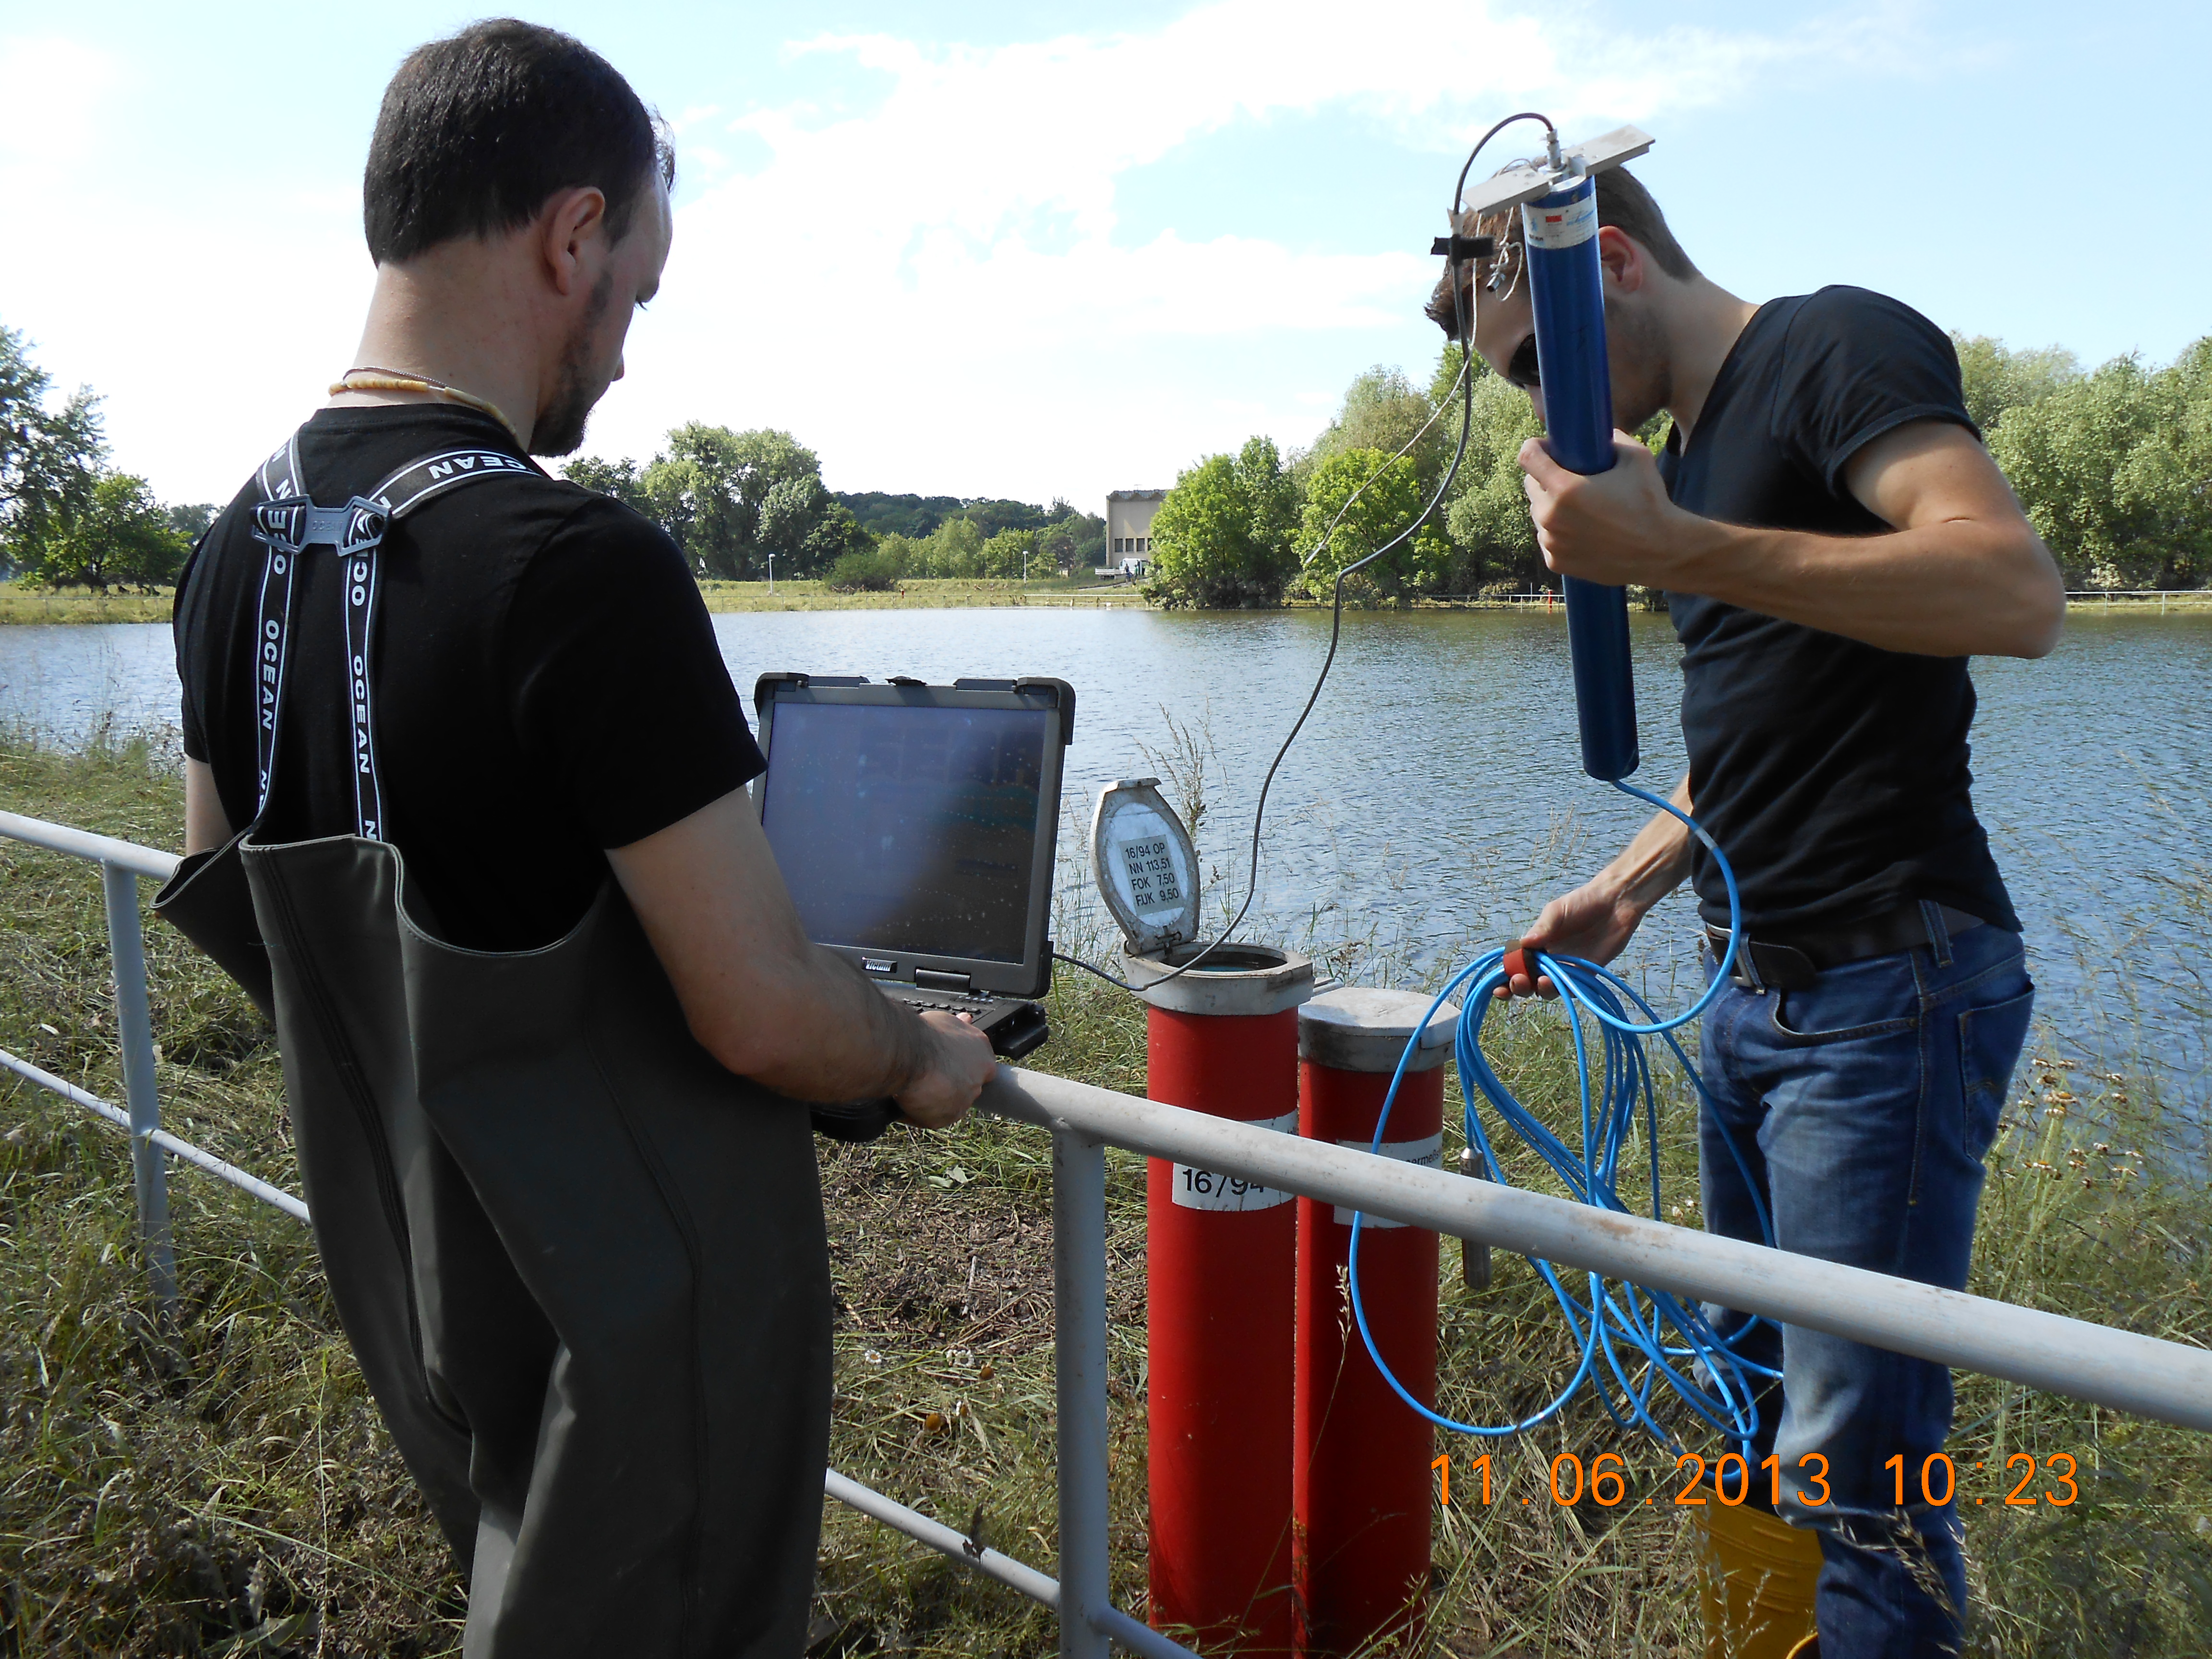 Two person installing equipement in a monitoring well, background river